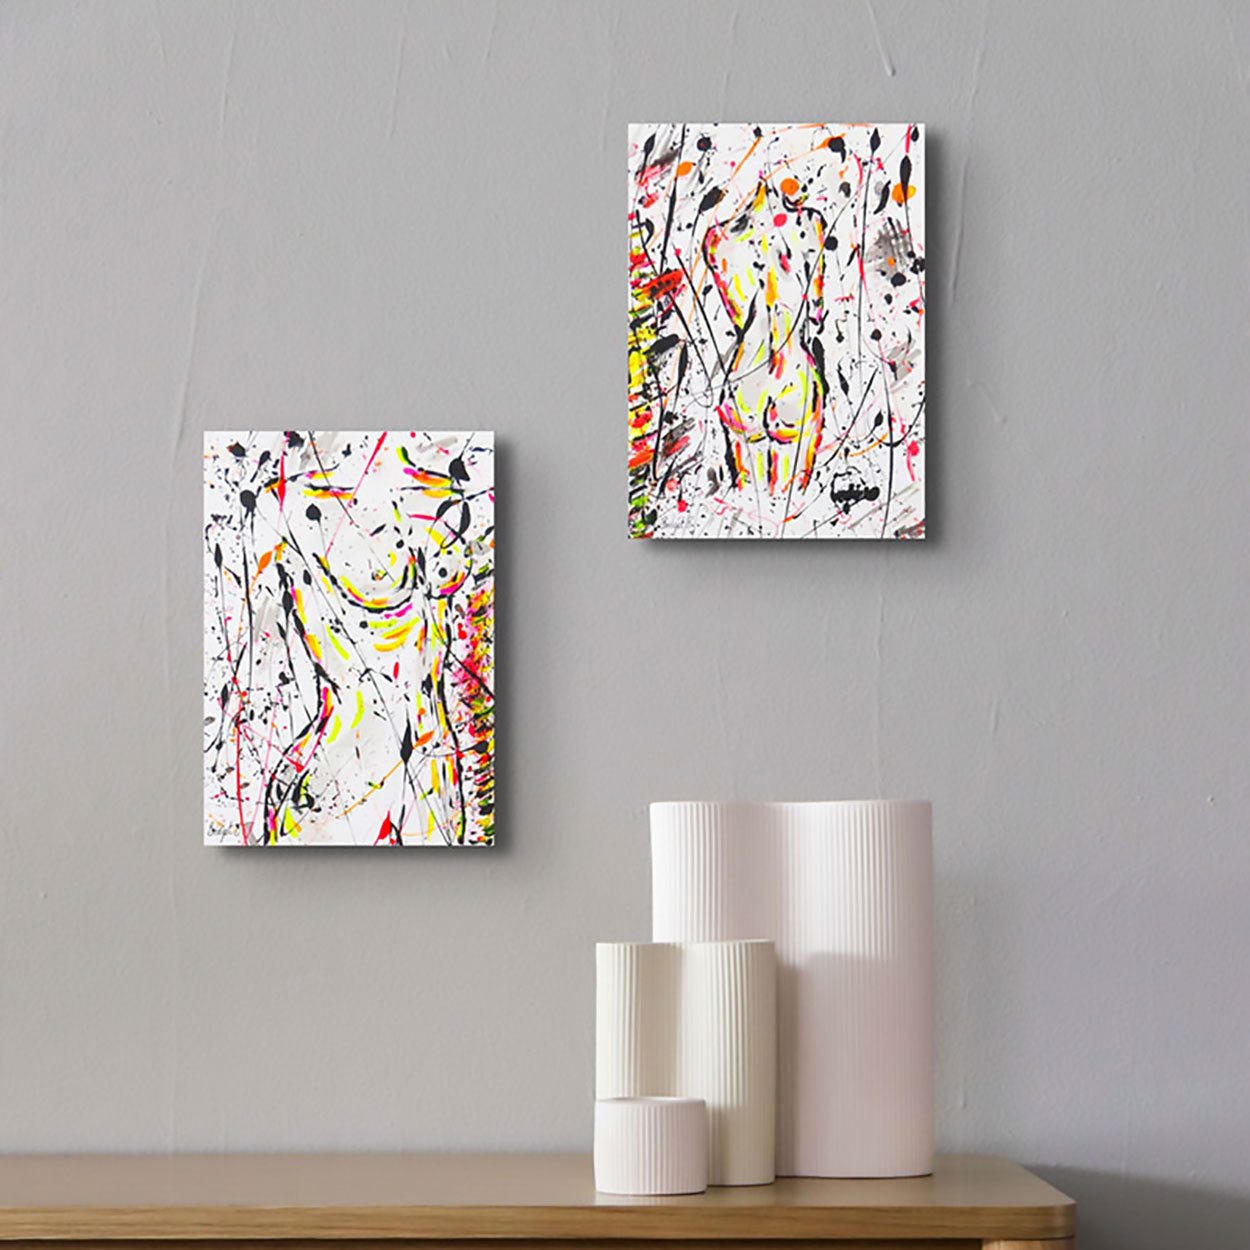 From left, Nude I original abstract painting of female figure seen hanging on wall paired with Nude II above wooden table with white accessories.  Abstract art by Bridget Bradley